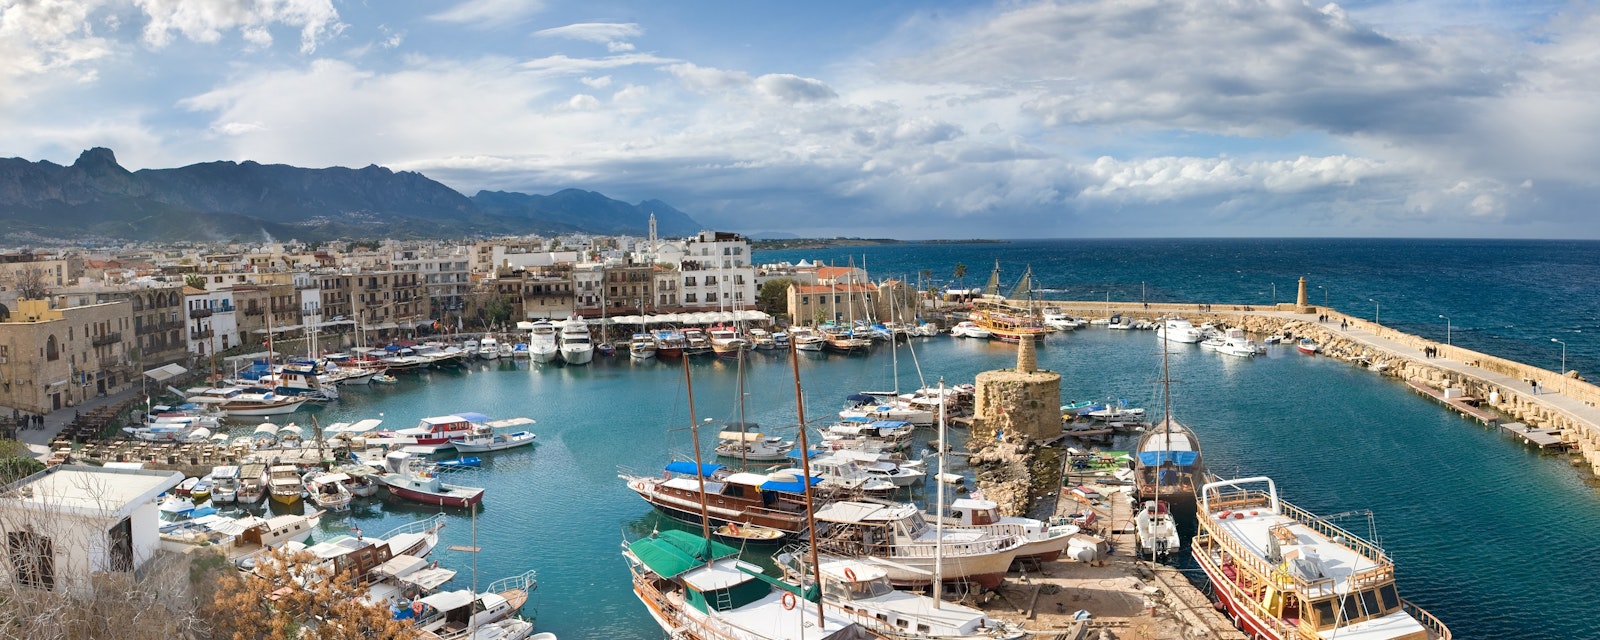 The,View,From,Girne,Castle,Harbour,,Northern,Cyprus.,Winter.